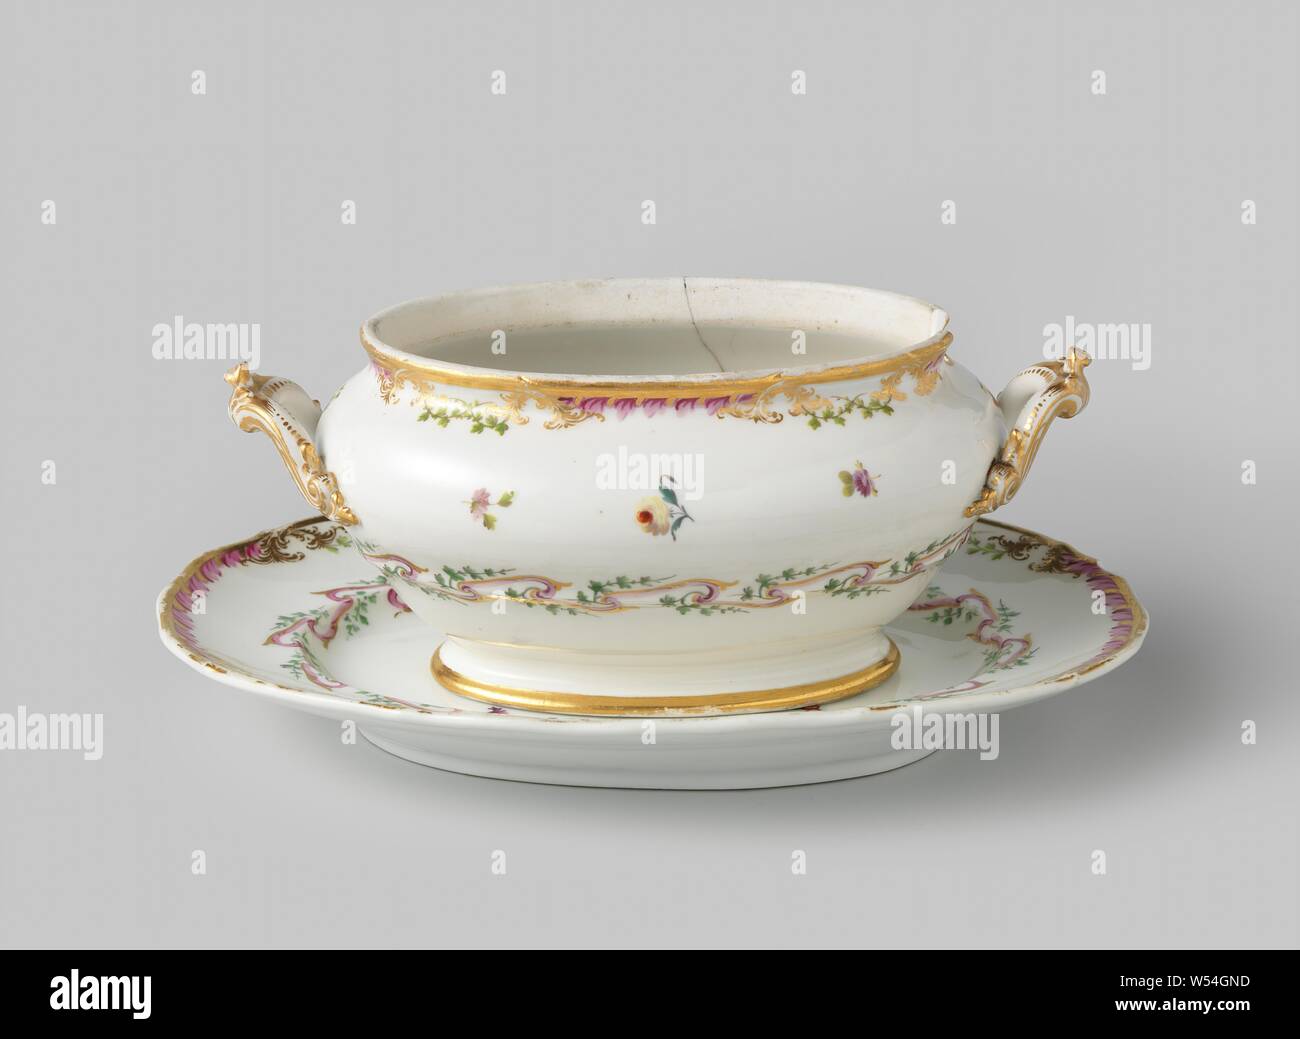 Sauce bowl, belonging to a service with a slung ribbon motif with leaves, flower bouquets and sprinkled flower branches, originally two, belonging to a porcelain service with a slung ribbon motif in purple and gold with green leaves, flower bouquets and sprinkled flower branches. Borders slightly corrugated with decoration in gold with a purple leaf motif between which green crossed leaf motif. Marked: M.O.L. and Amstel. Remark: second dish was handed over in 1948 to the International Museum of Ceramics in Faenza., Manufactuur Oud-Loosdrecht, Amsterdam, 1780 - in or before 1820, porcelain Stock Photo